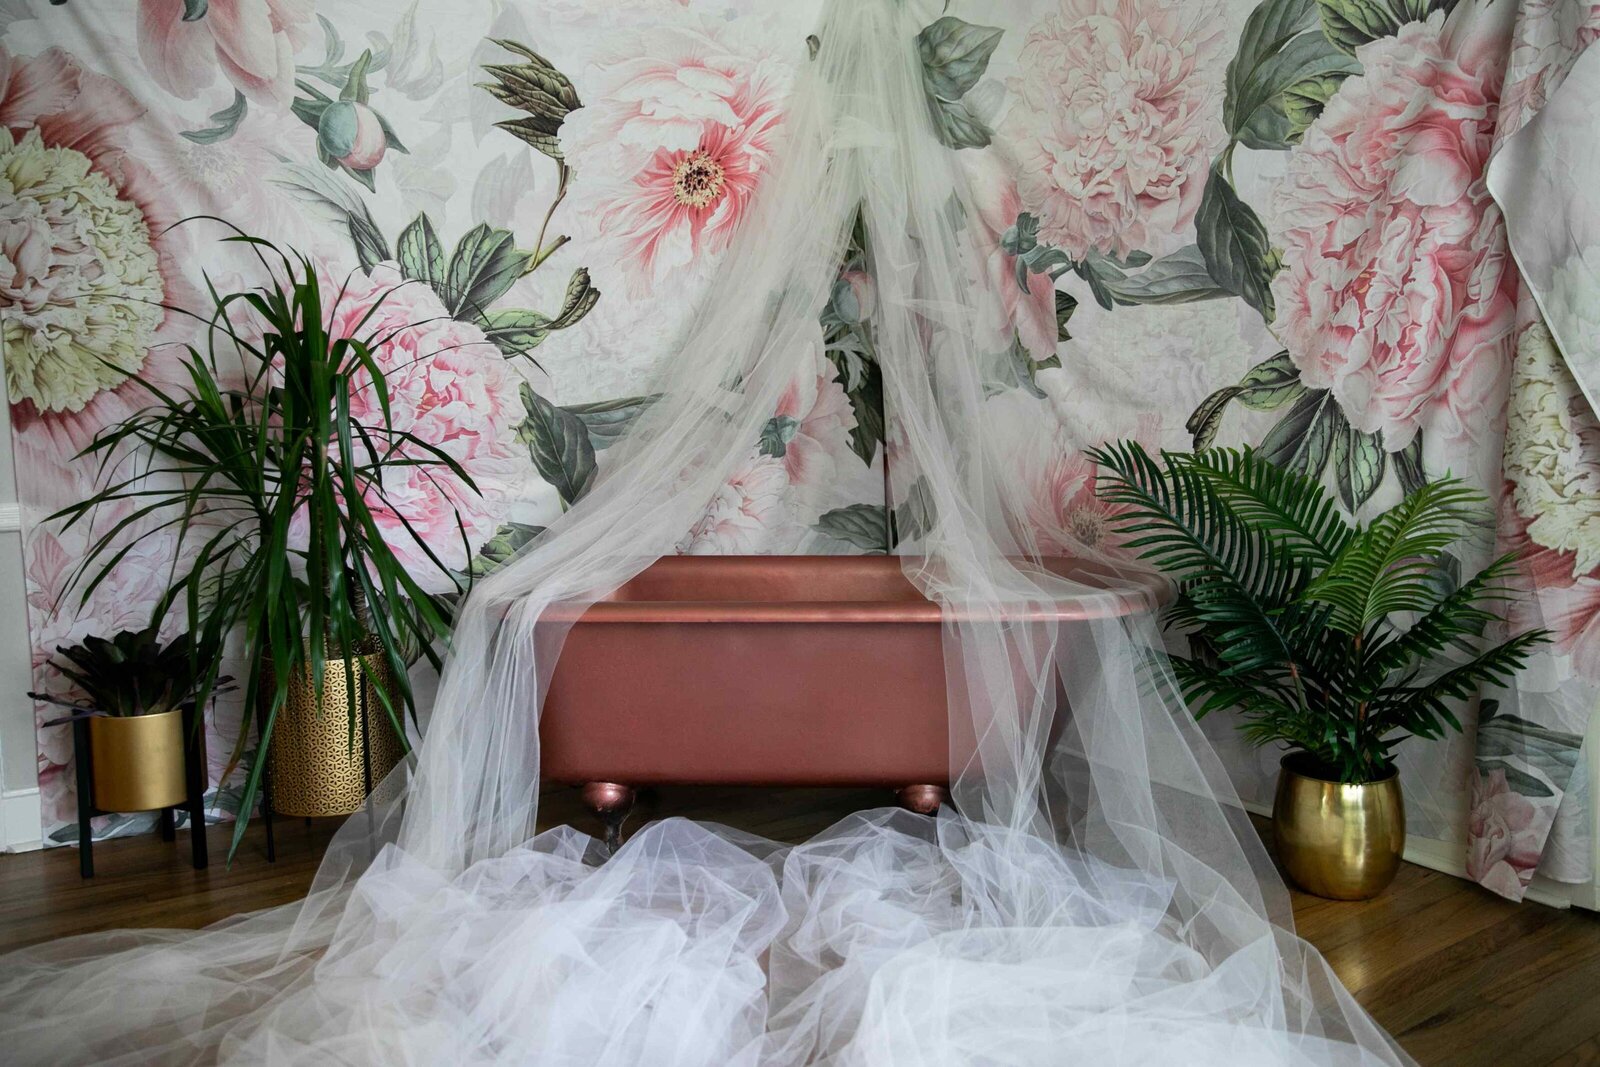 studio photography set - clawfoot bathtub with tulle, plants, floral wallpaper